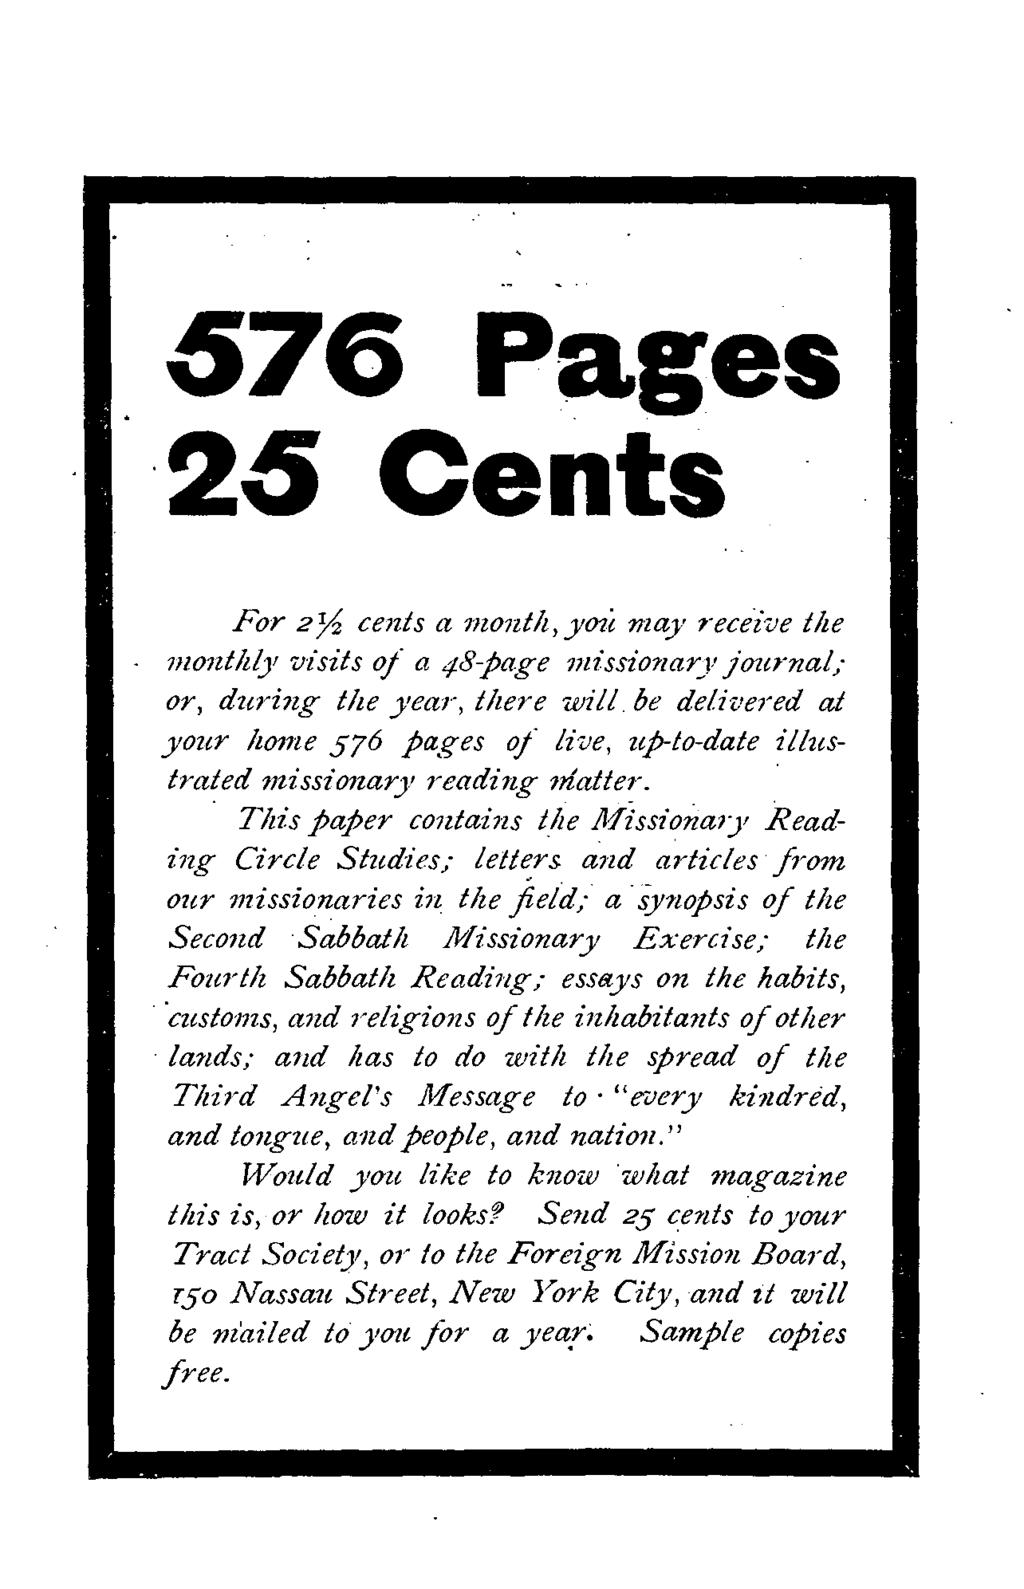 576 Pages 25 Cents For 21 2 cents a month, y6.2 may receive the monthly visits of a 48-page missionary journal; or, during the year, there will.